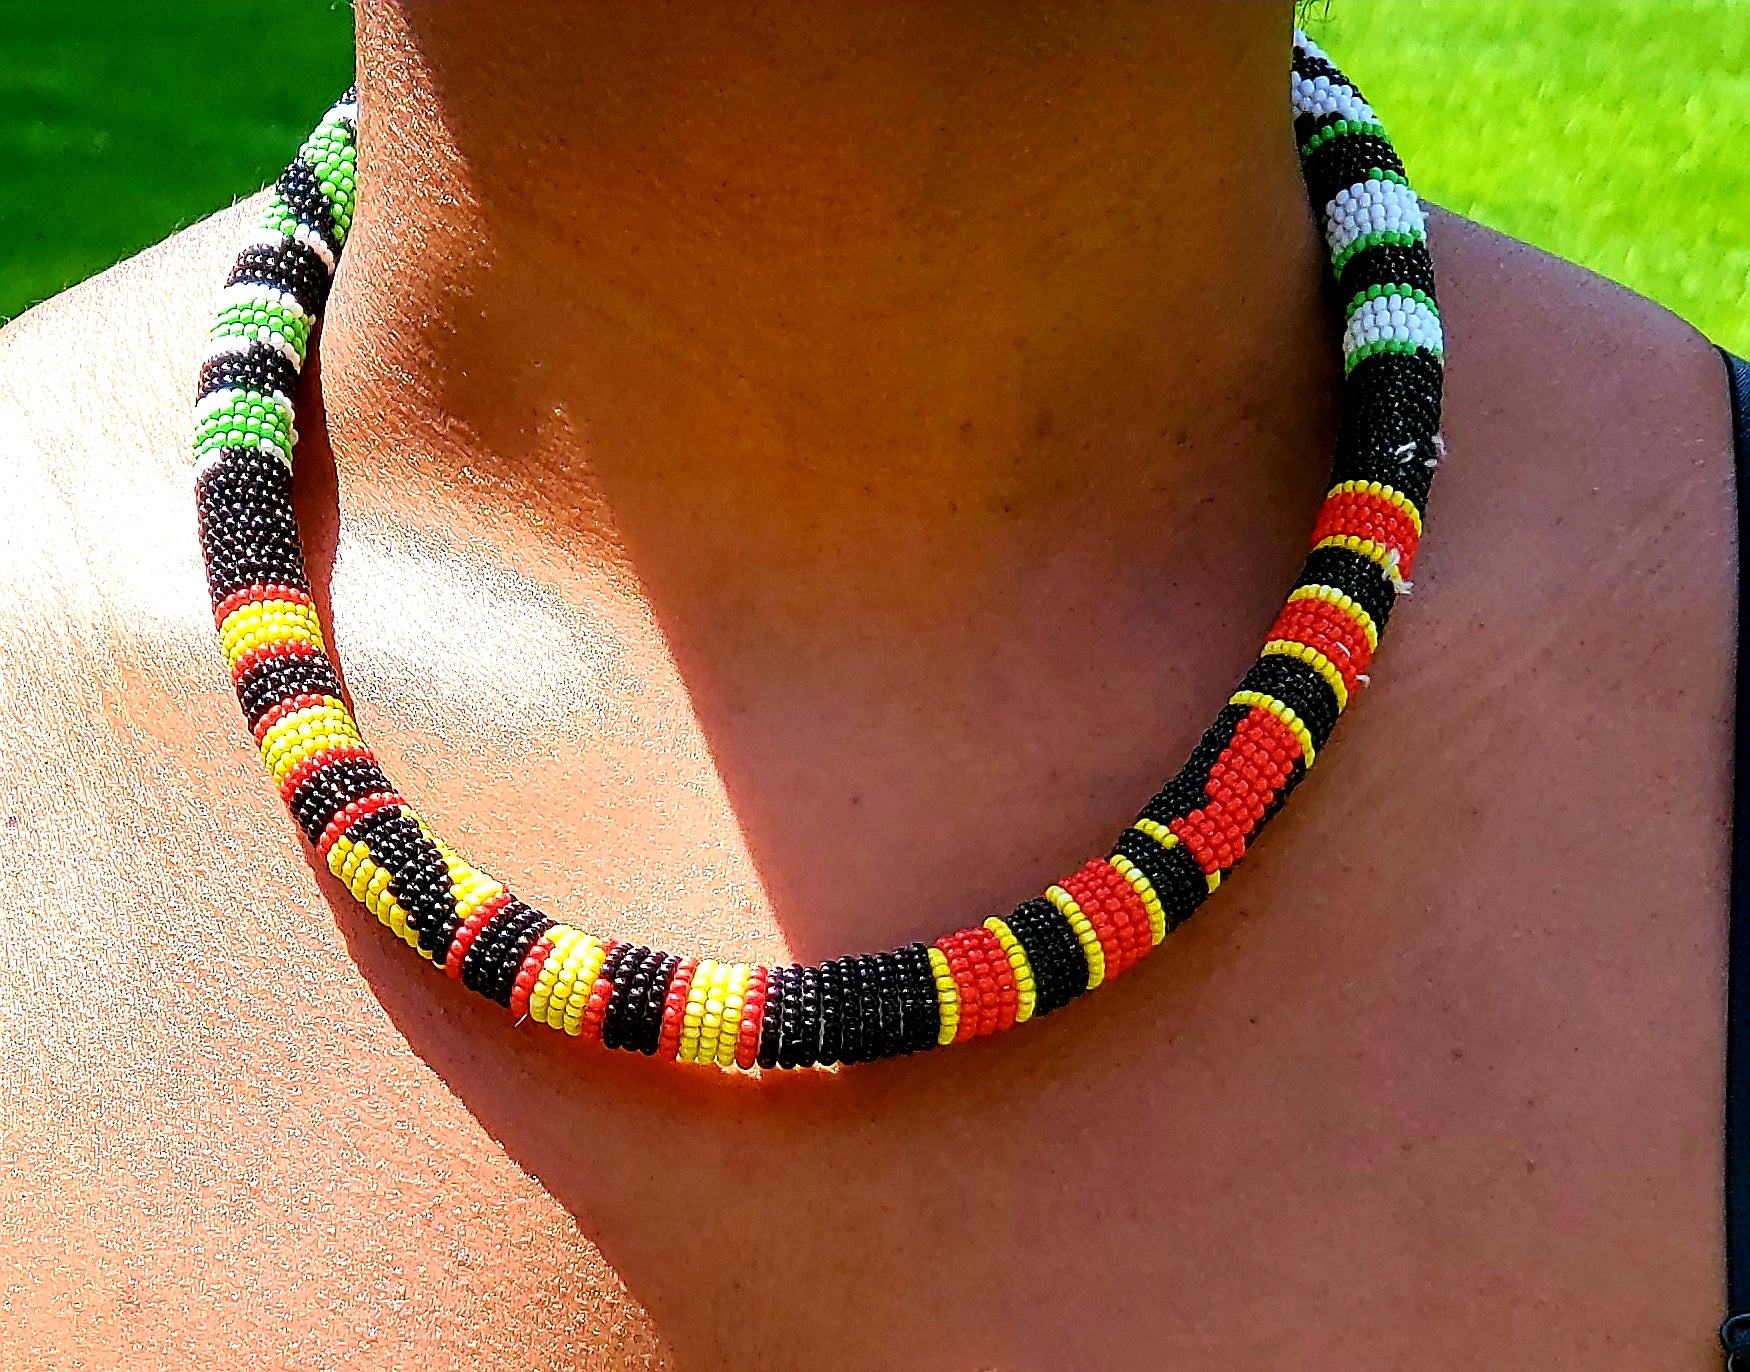 Black, red, yellow patterned Ghana necklace, with white and green pattern on the back side